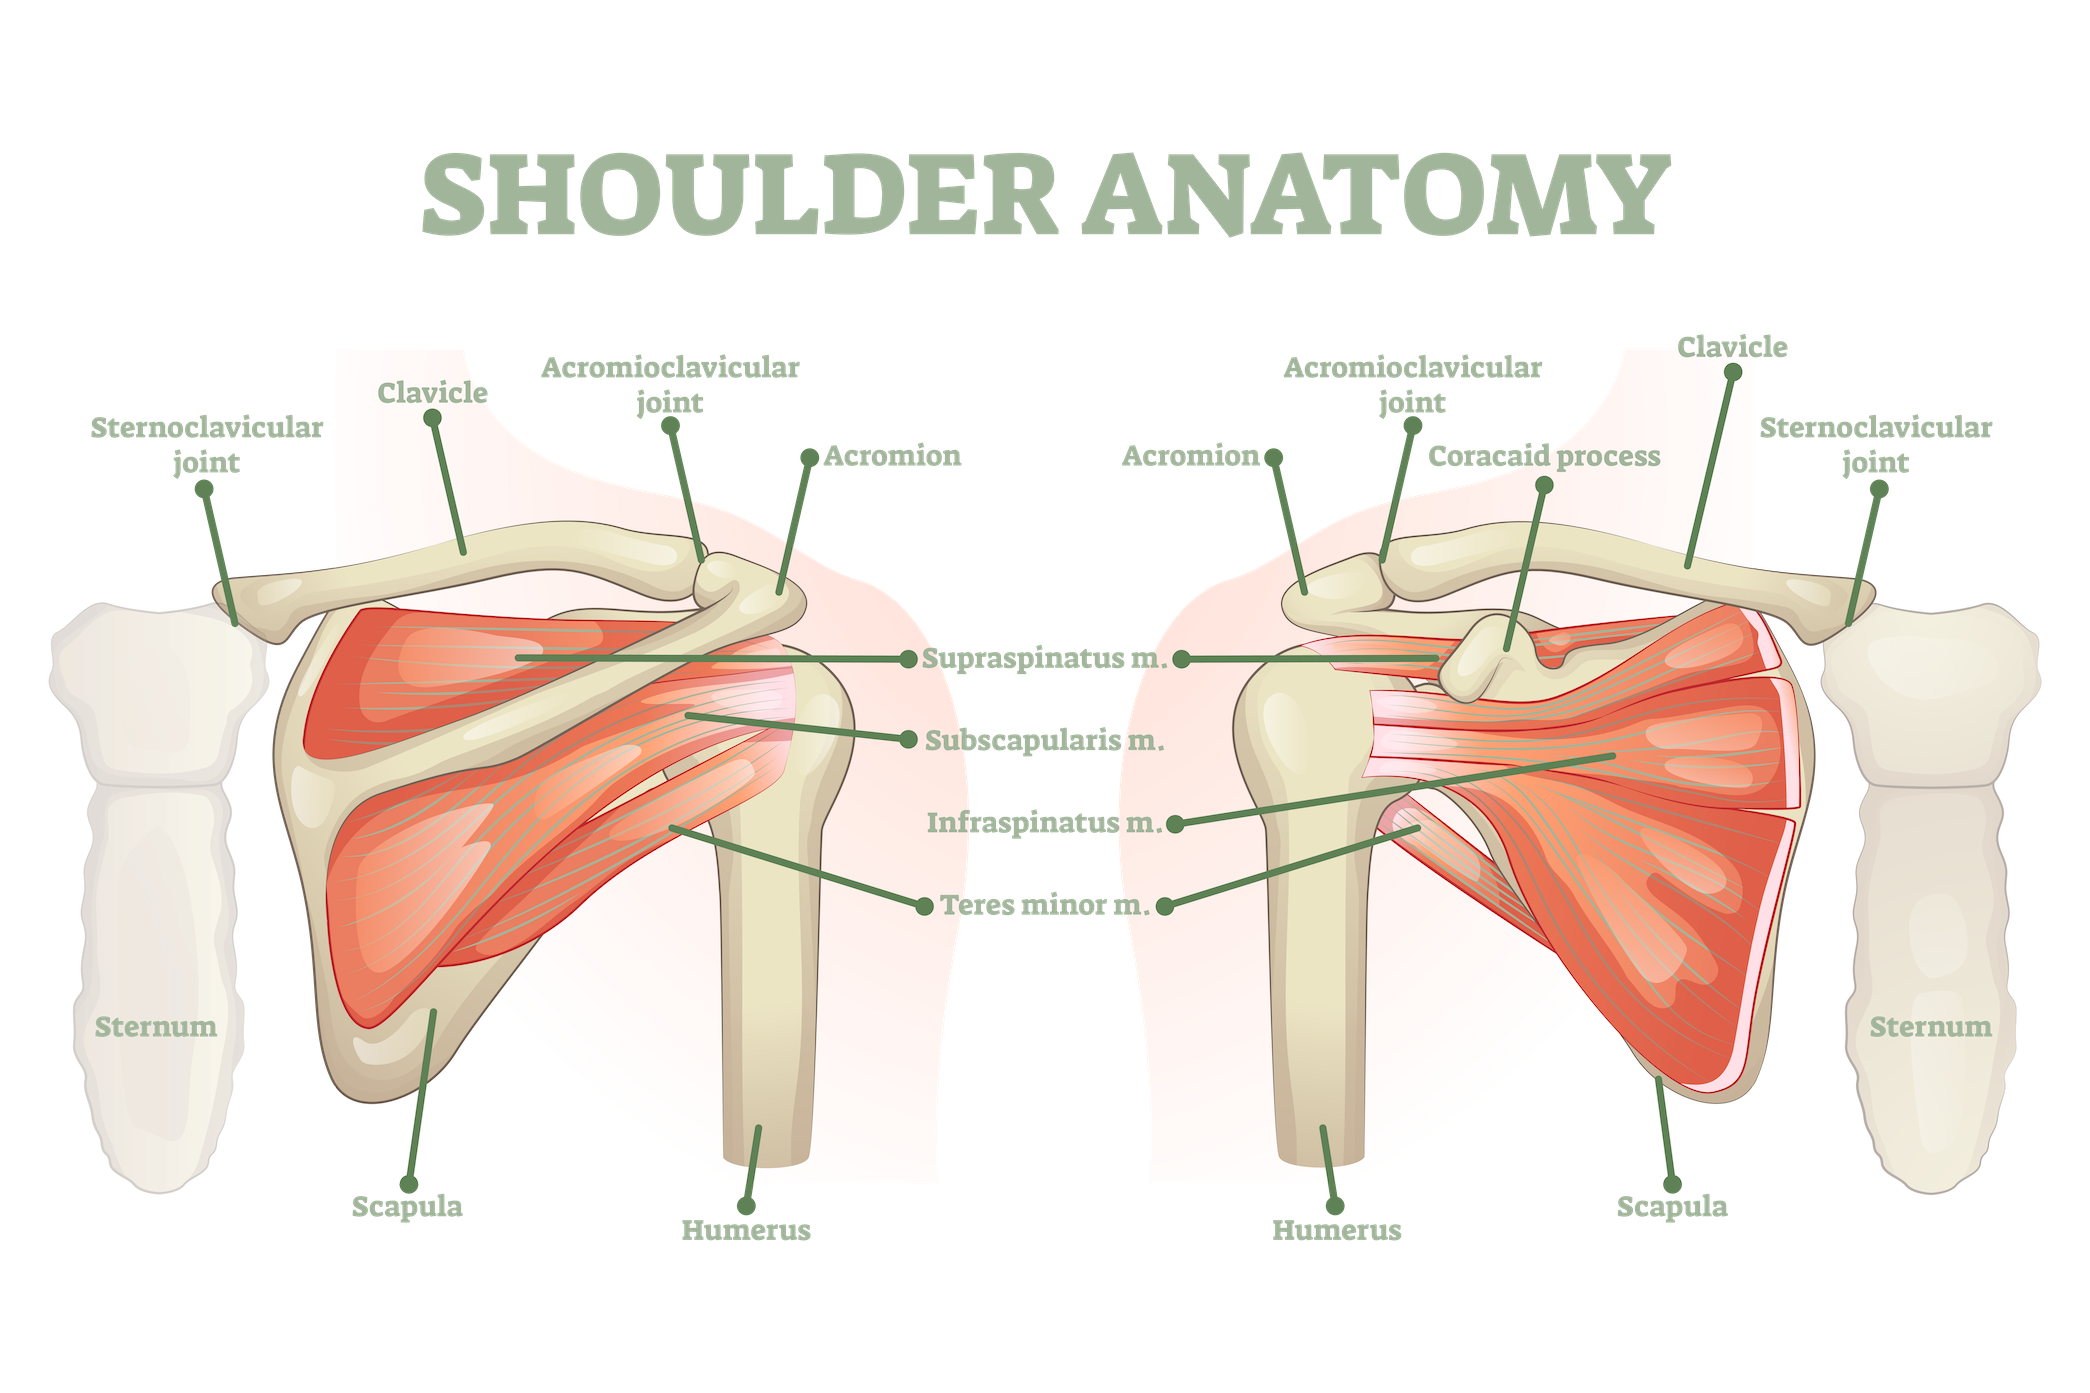 Shoulder Anatomy broken down into a graphic. Dr. Giang